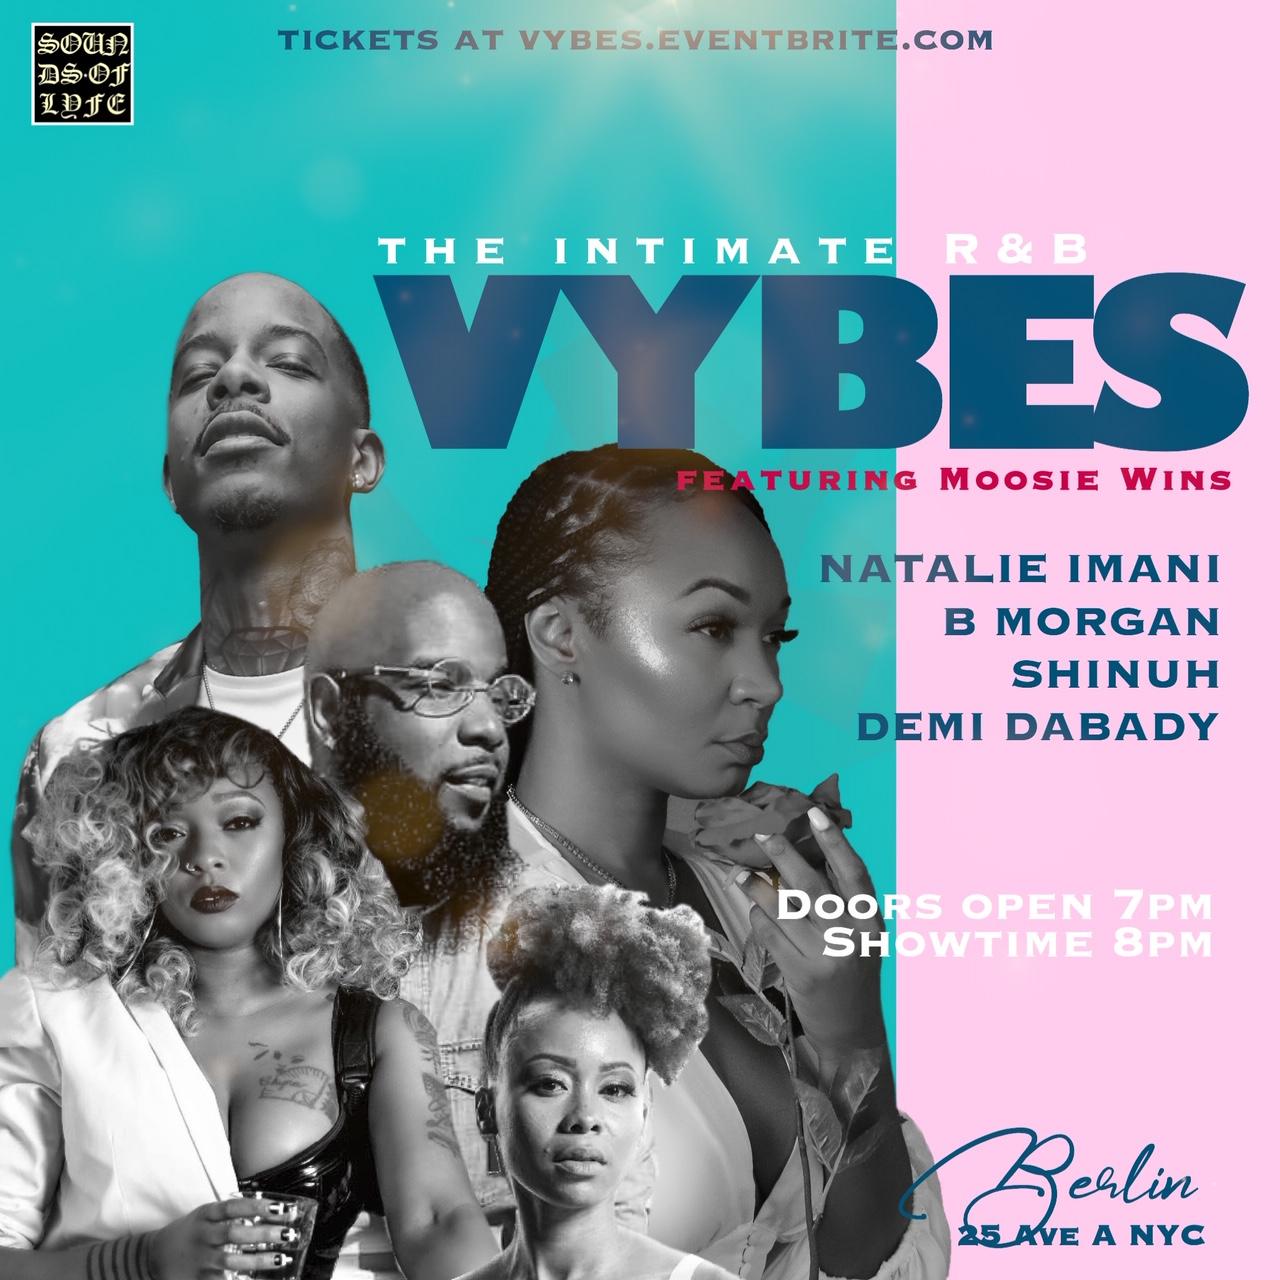 INTIMATE R&B VYBES